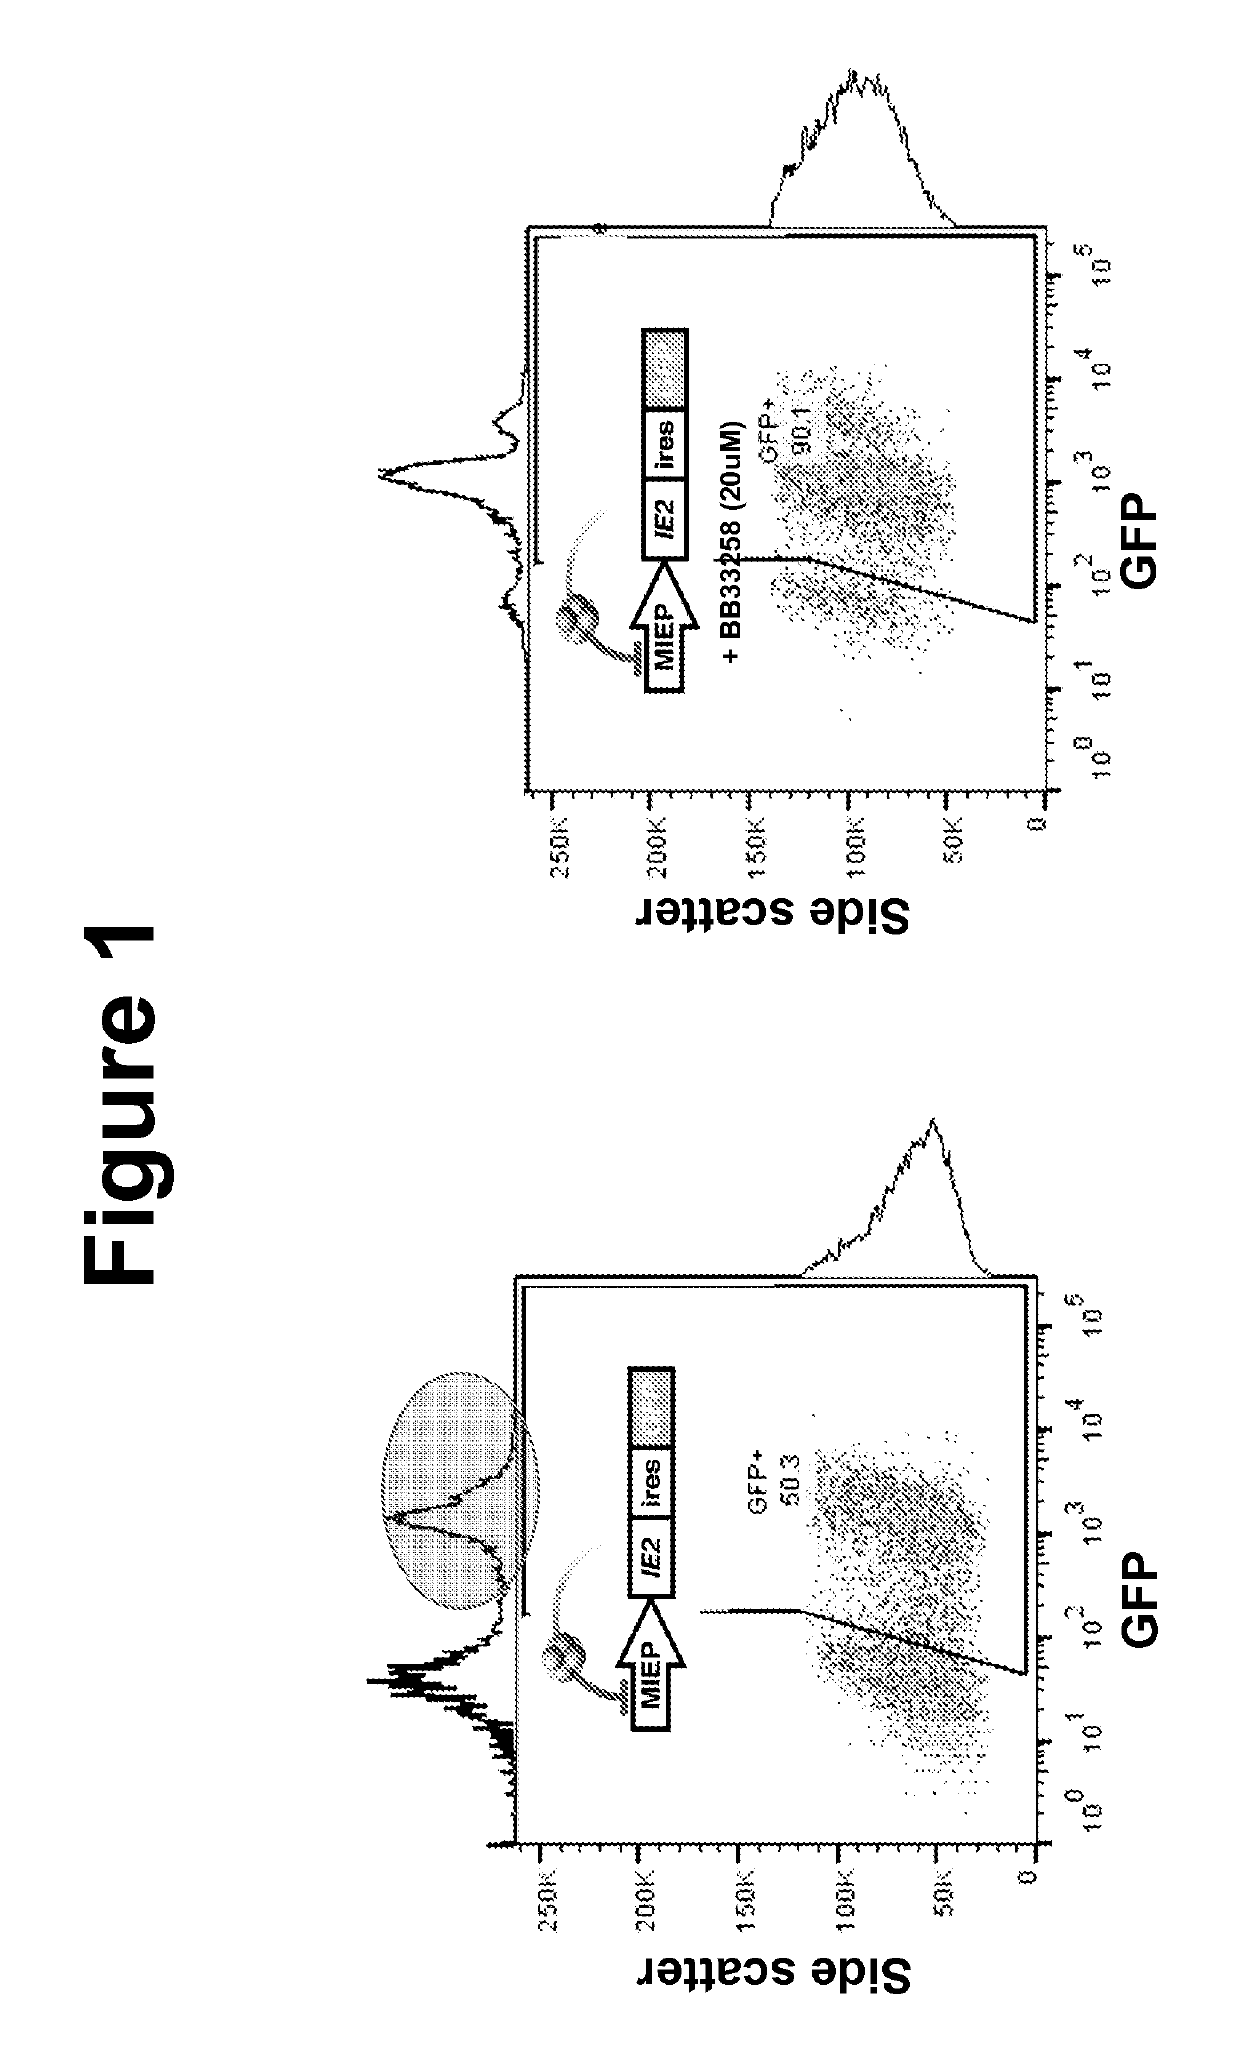 Methods for treating a cytomegalovirus infection